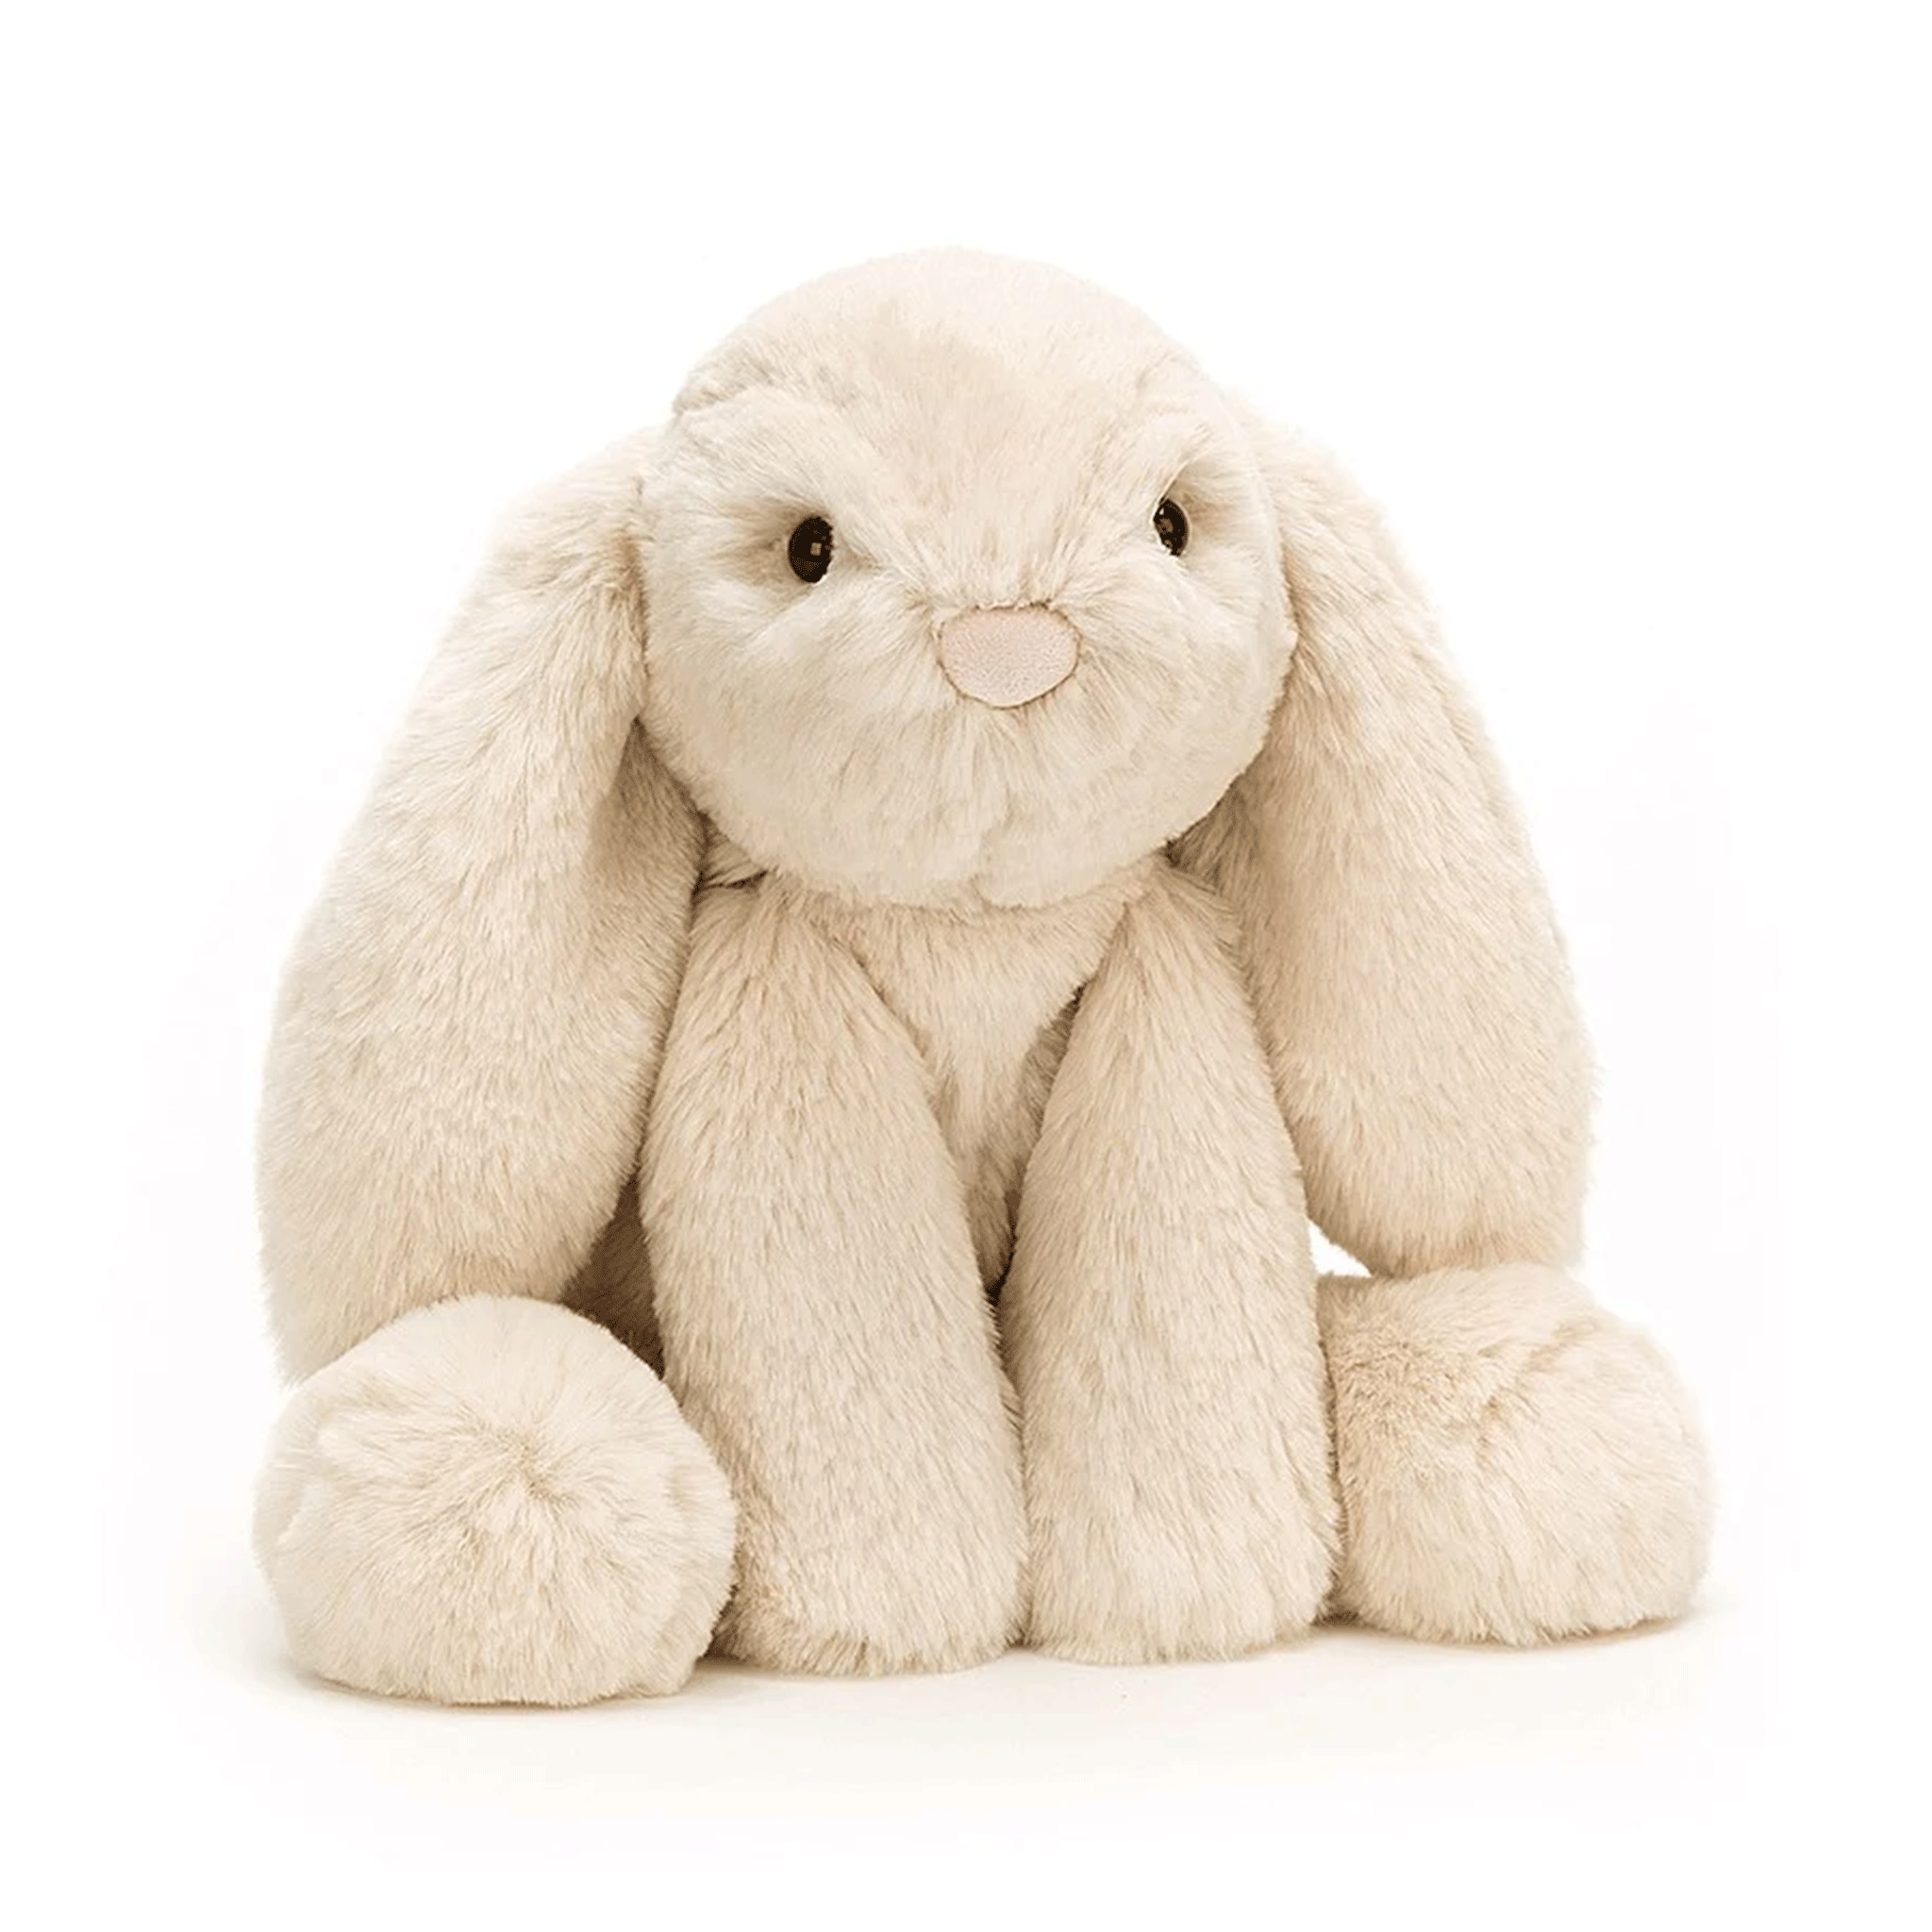 On a white background is a tan / ivory bunny stuffed animal with floppy ears and a fluffy tail. 